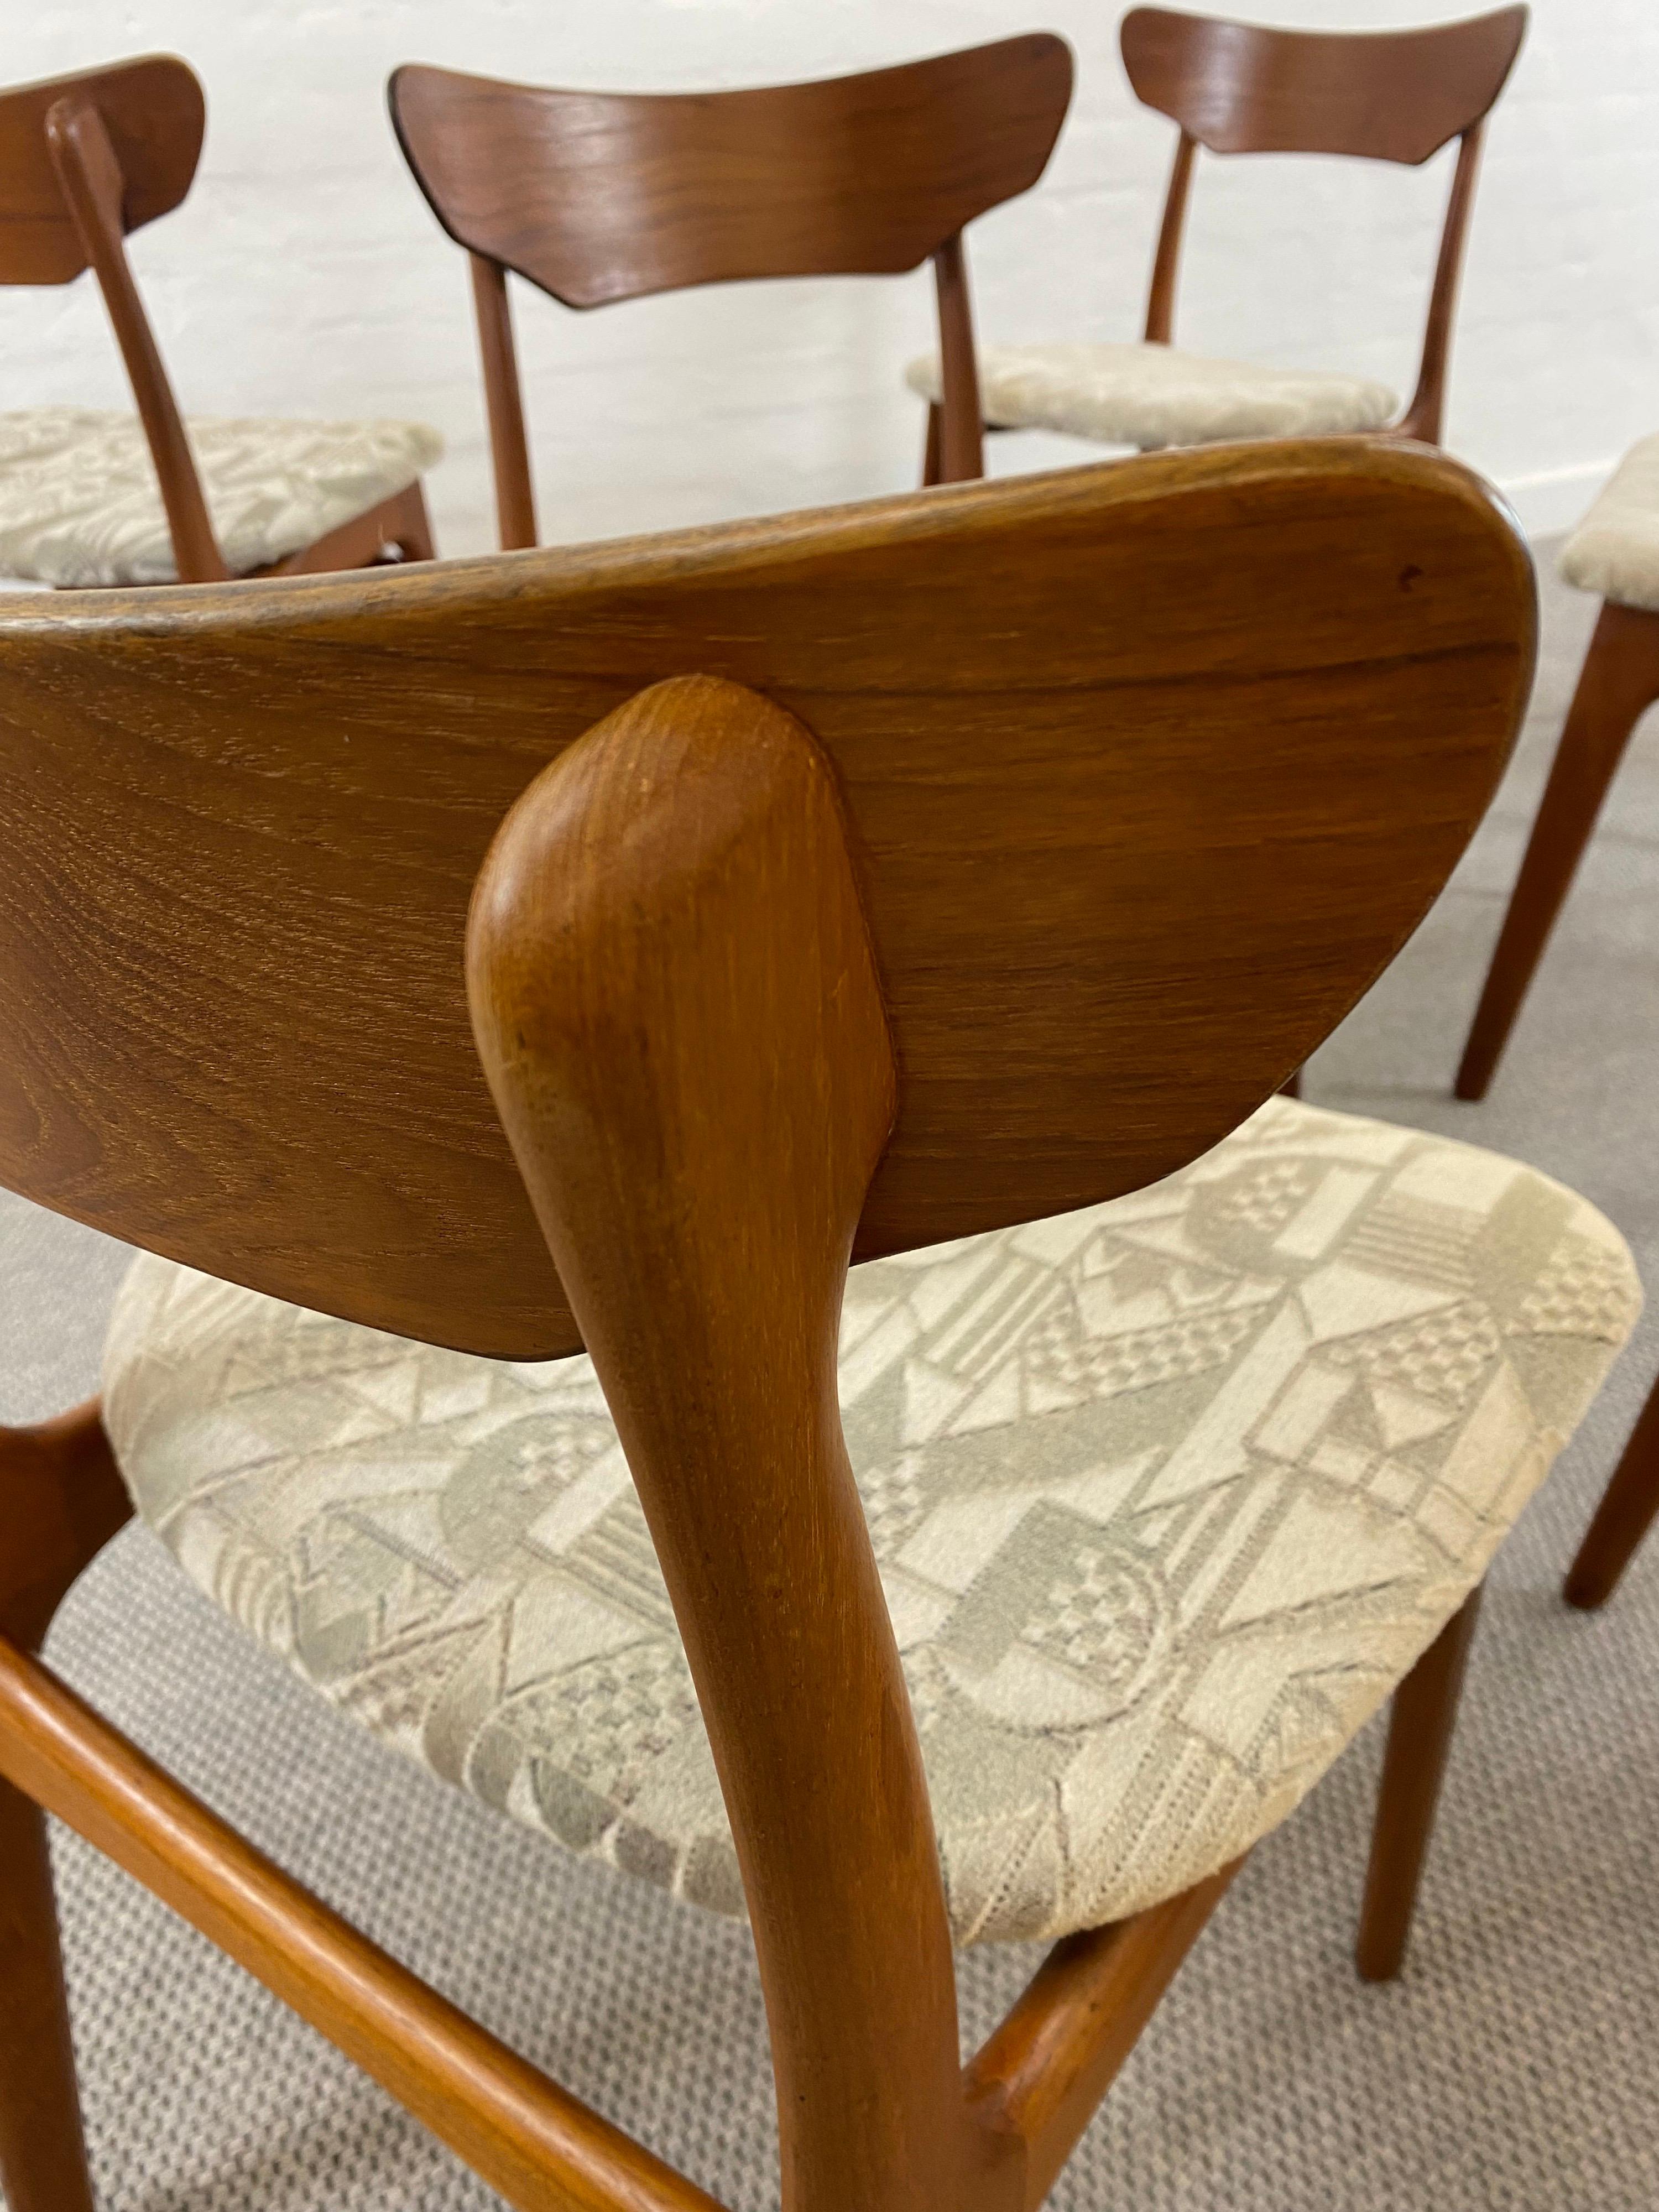 Upholstery Set of 8 Midcentury Teak Dining Chairs from Schionning & Elgaard, Denmark, 1960s